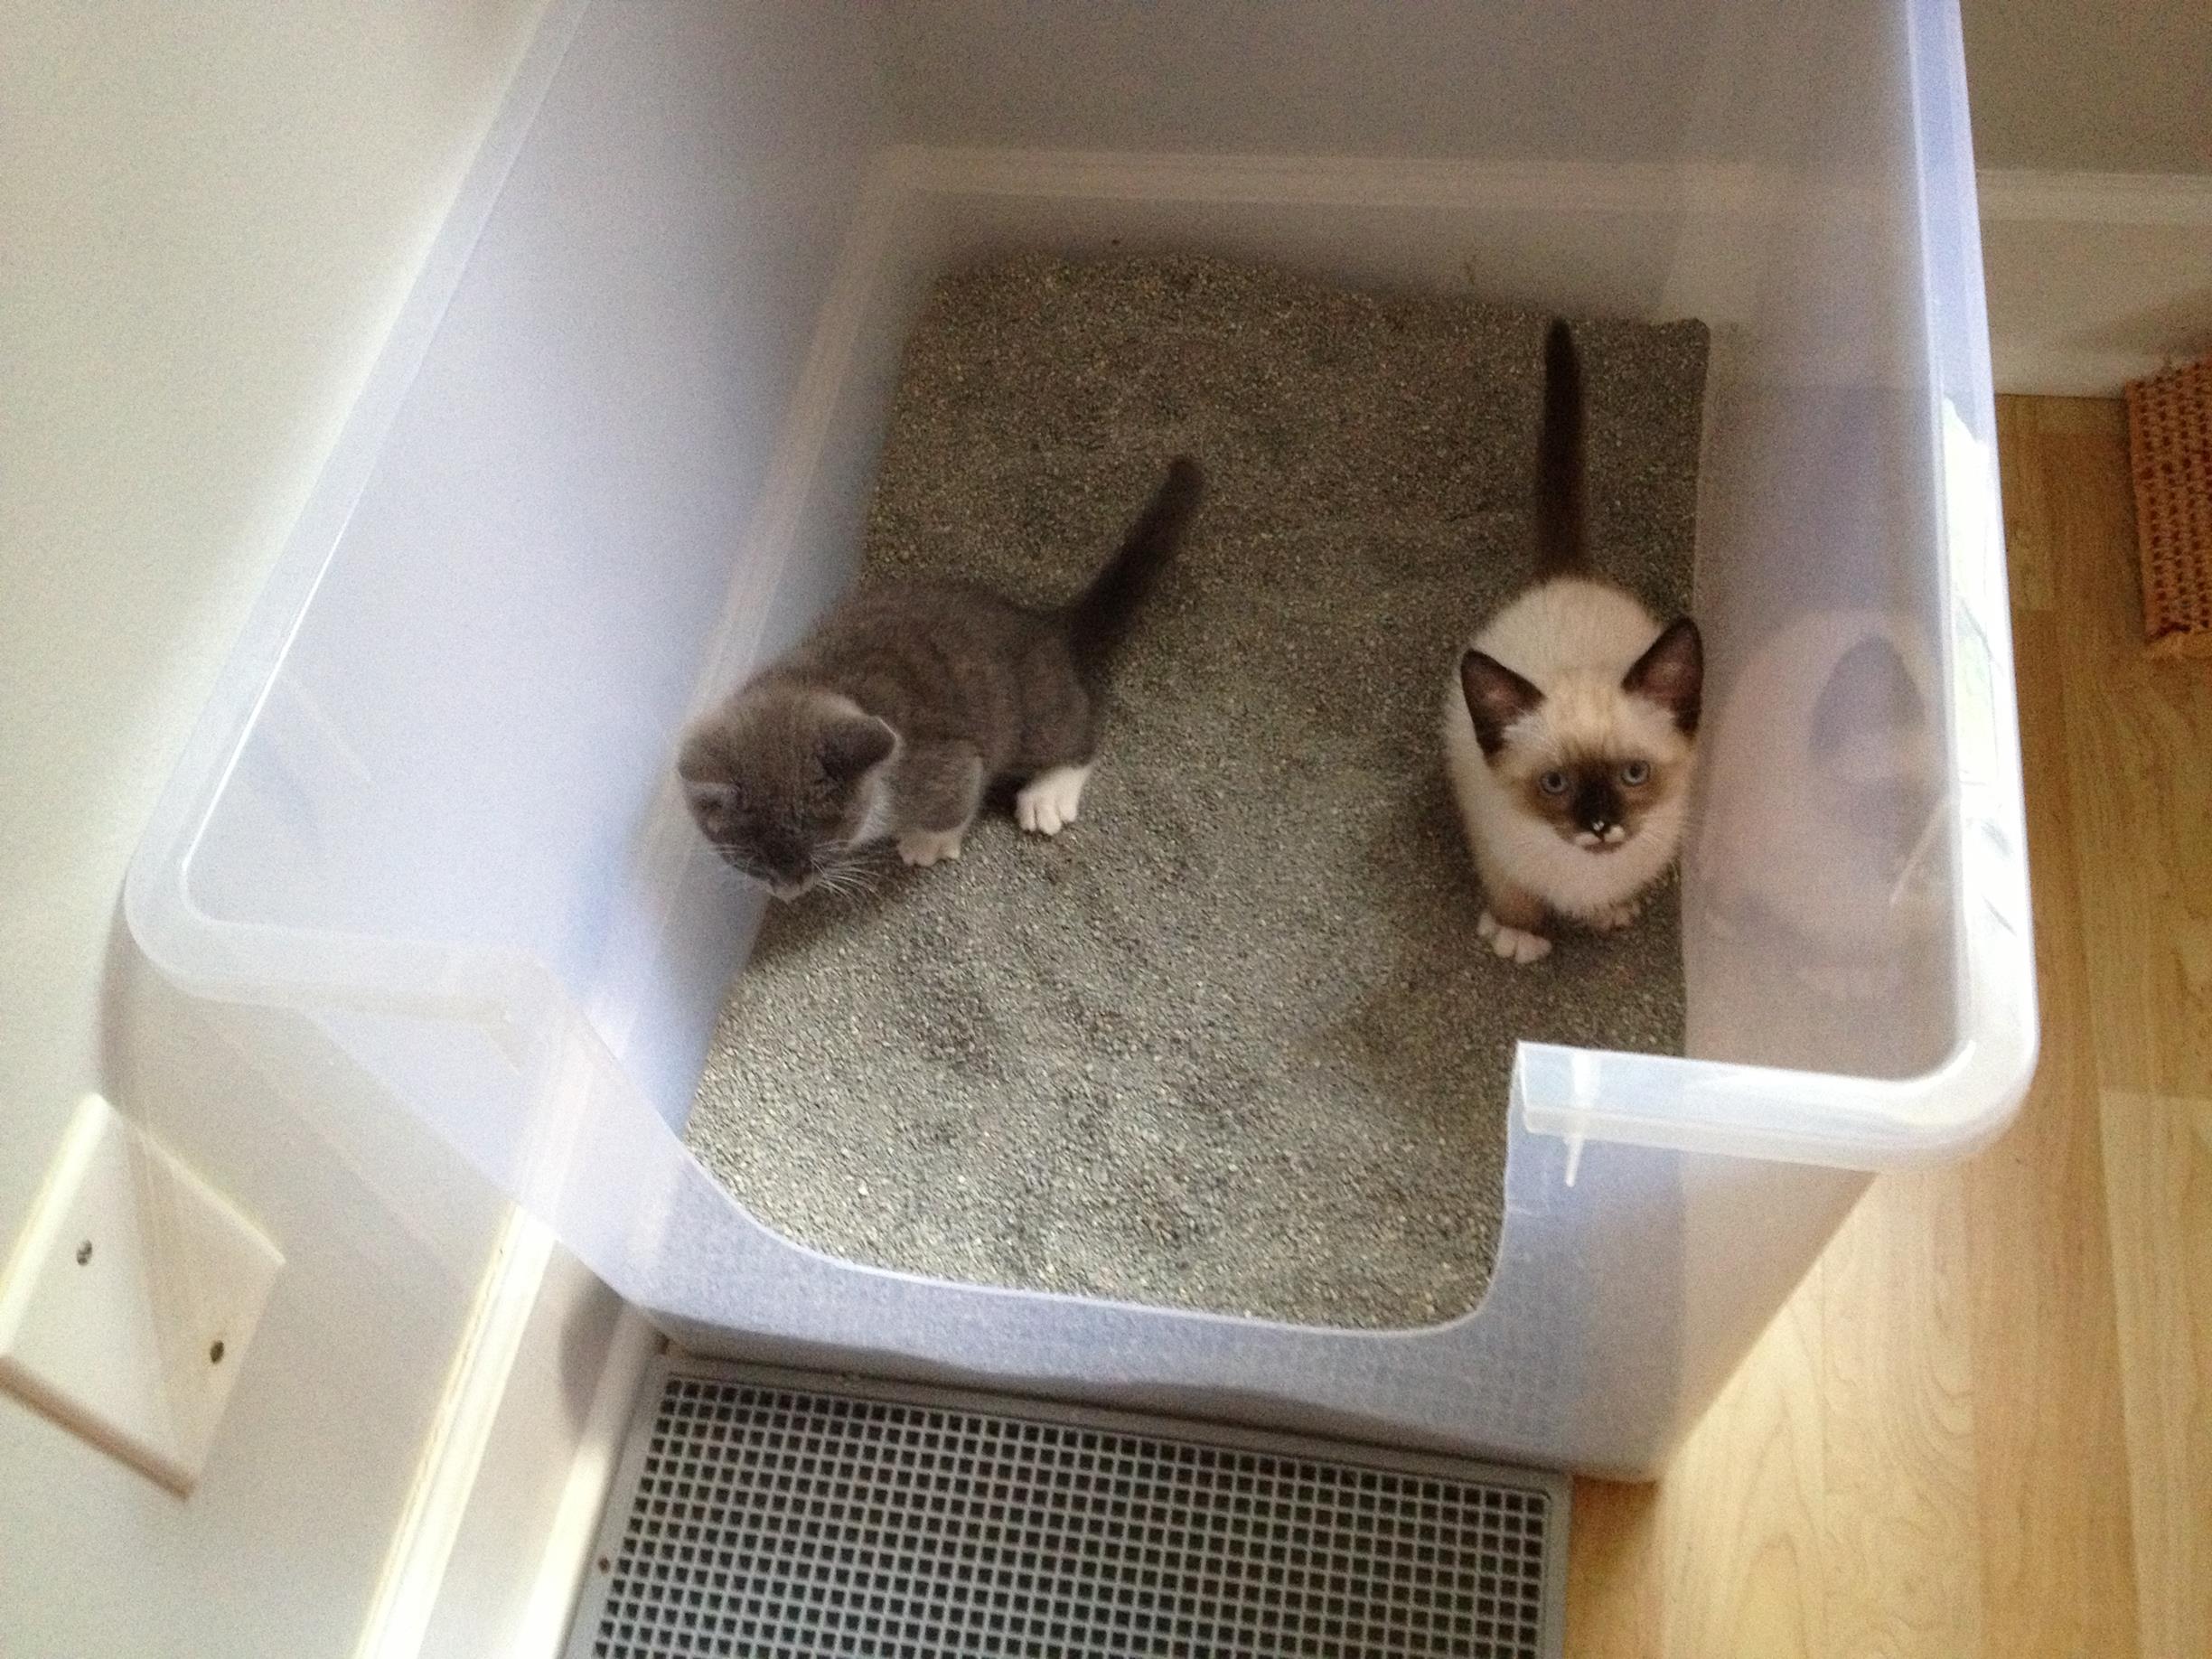 So inseparable they even used the litter box in unison!